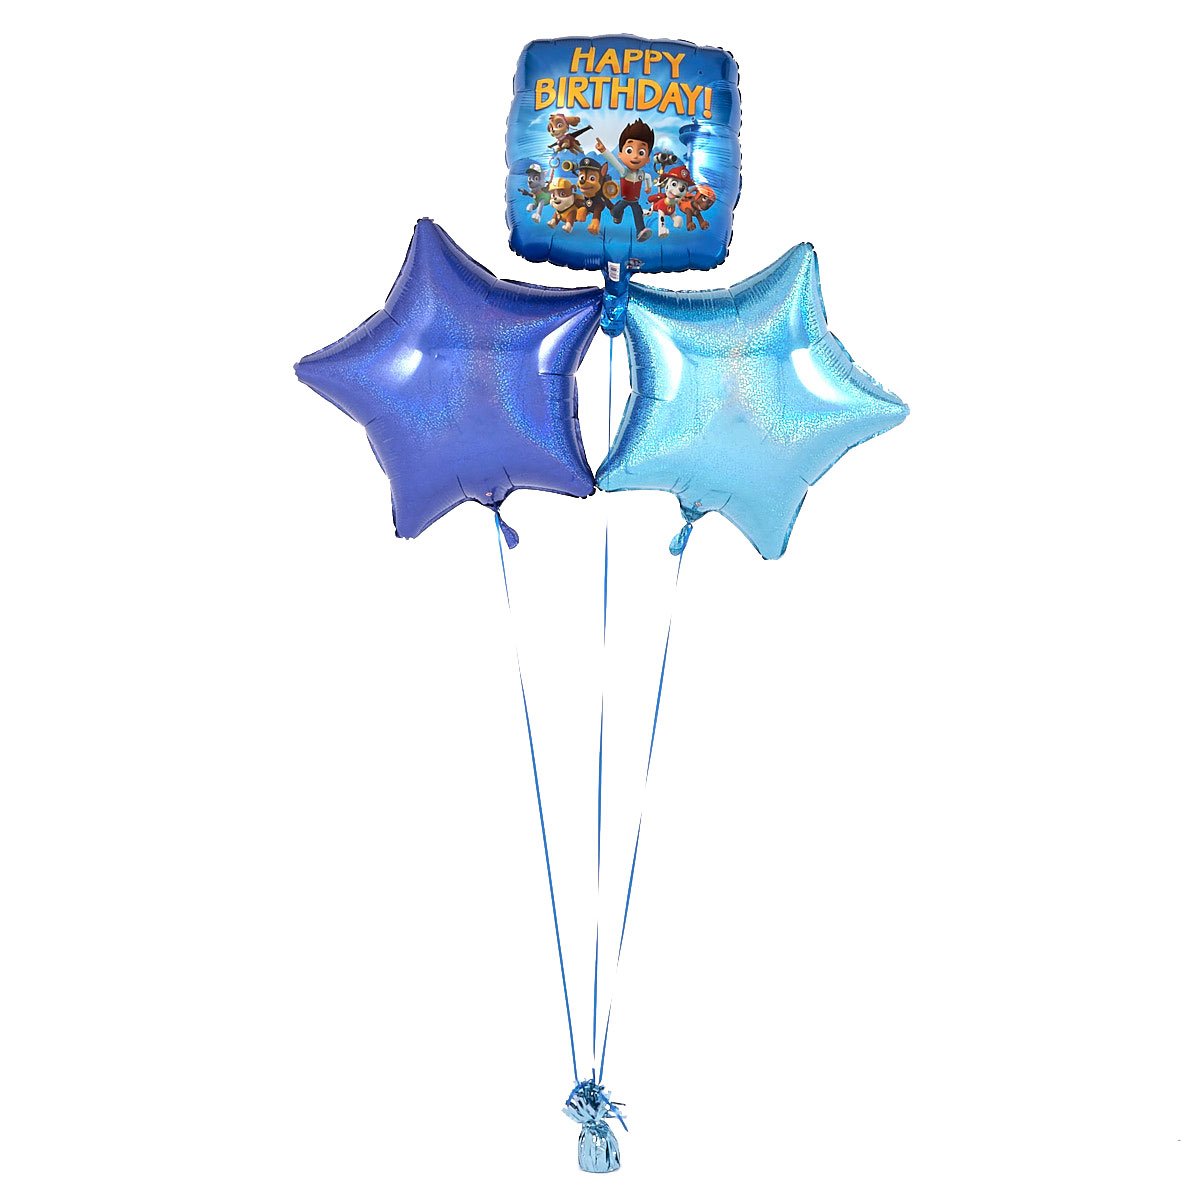 Paw Patrol Happy Birthday Blue Balloon Bouquet - DELIVERED INFLATED!